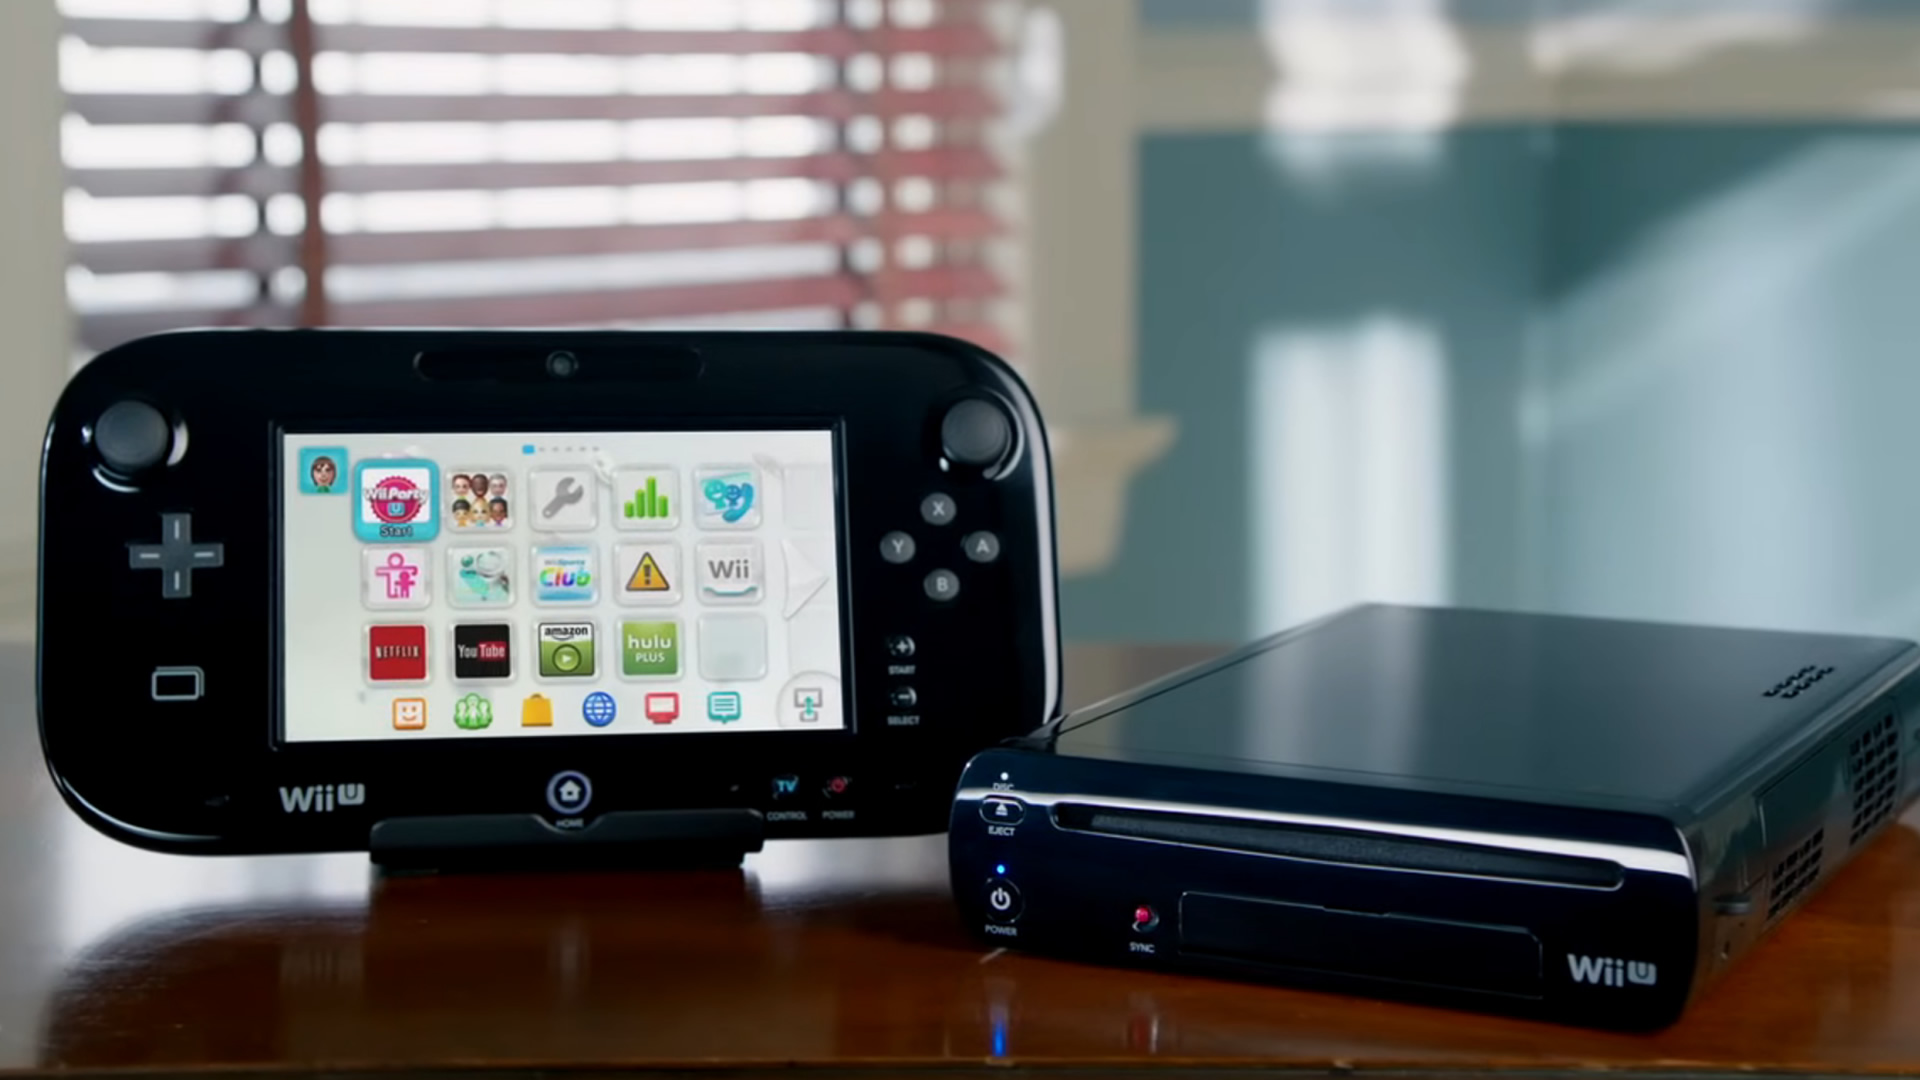 The 10 best Wii U games you can play on Nintendo Switch